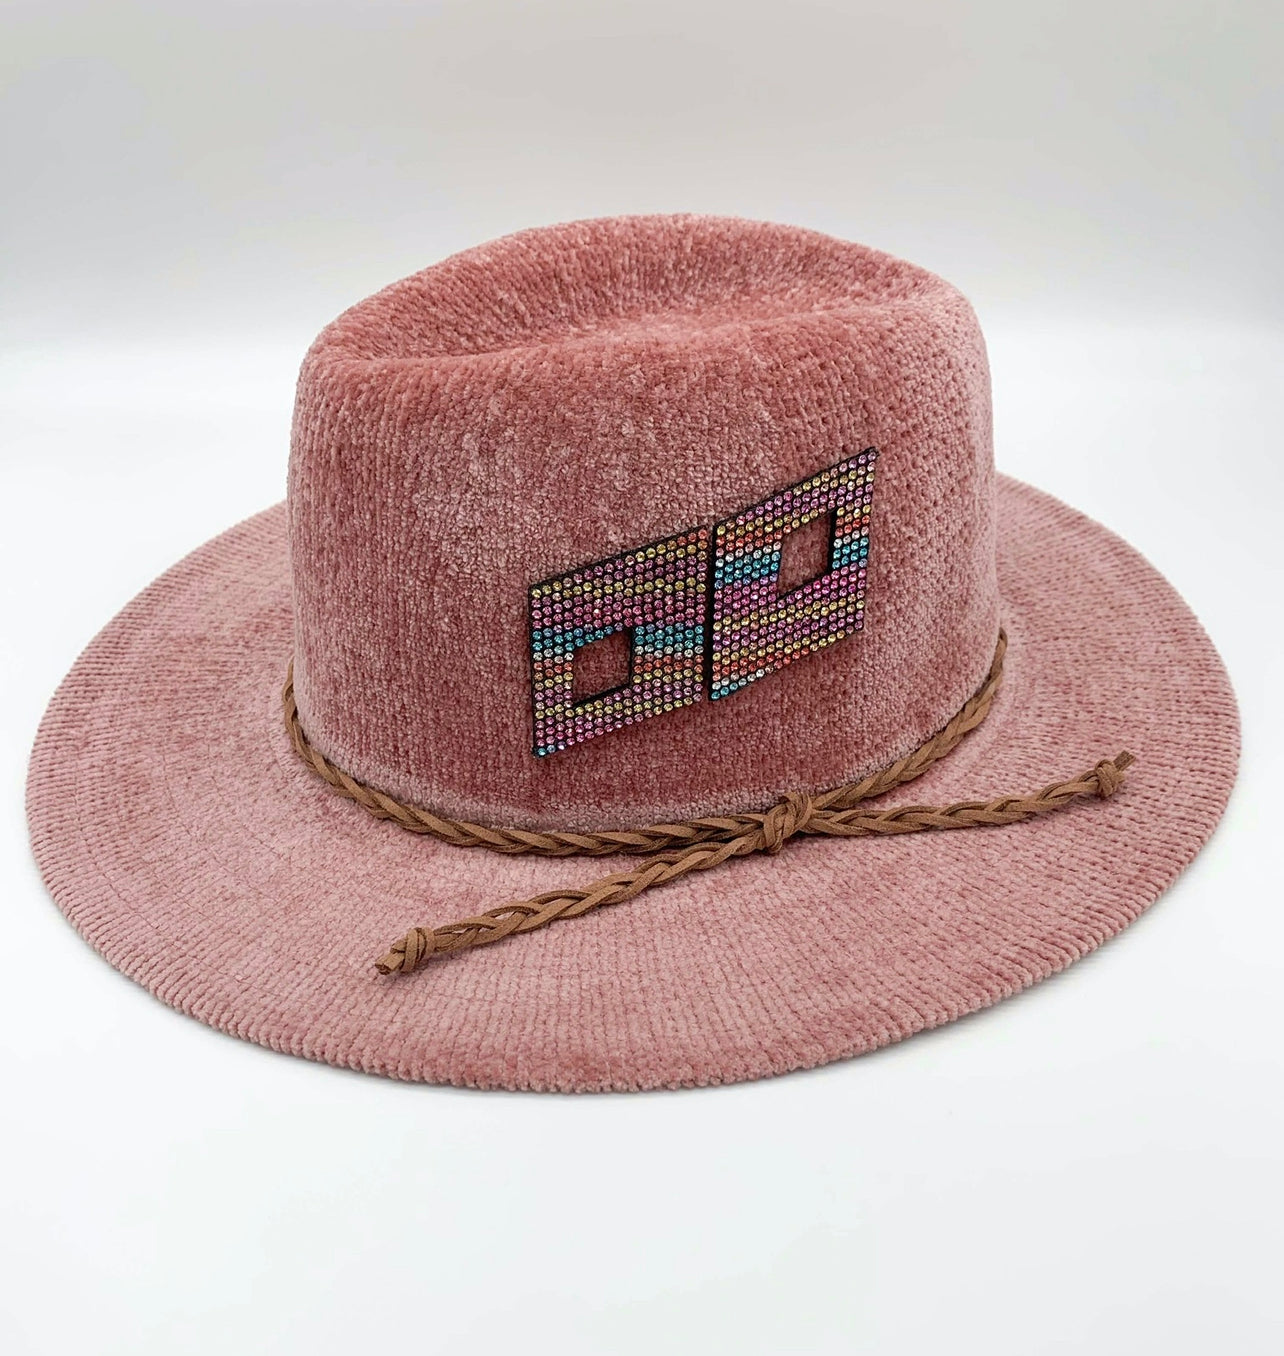 GLAM - Soft and Pink Fedora